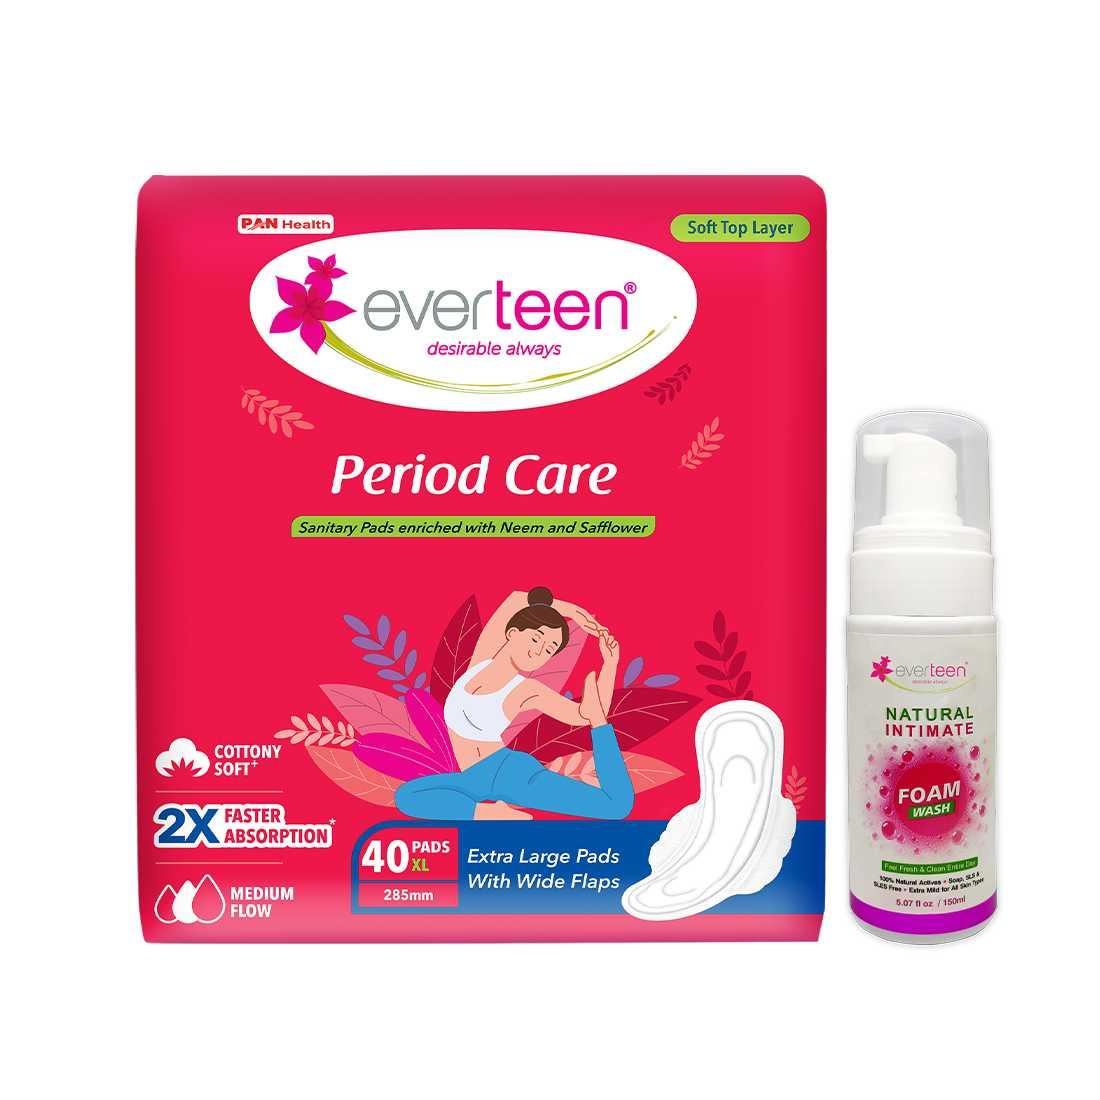 everteen Period Care XL Soft 40 Pads and Foam Intimate Wash 150ml 7419870399061